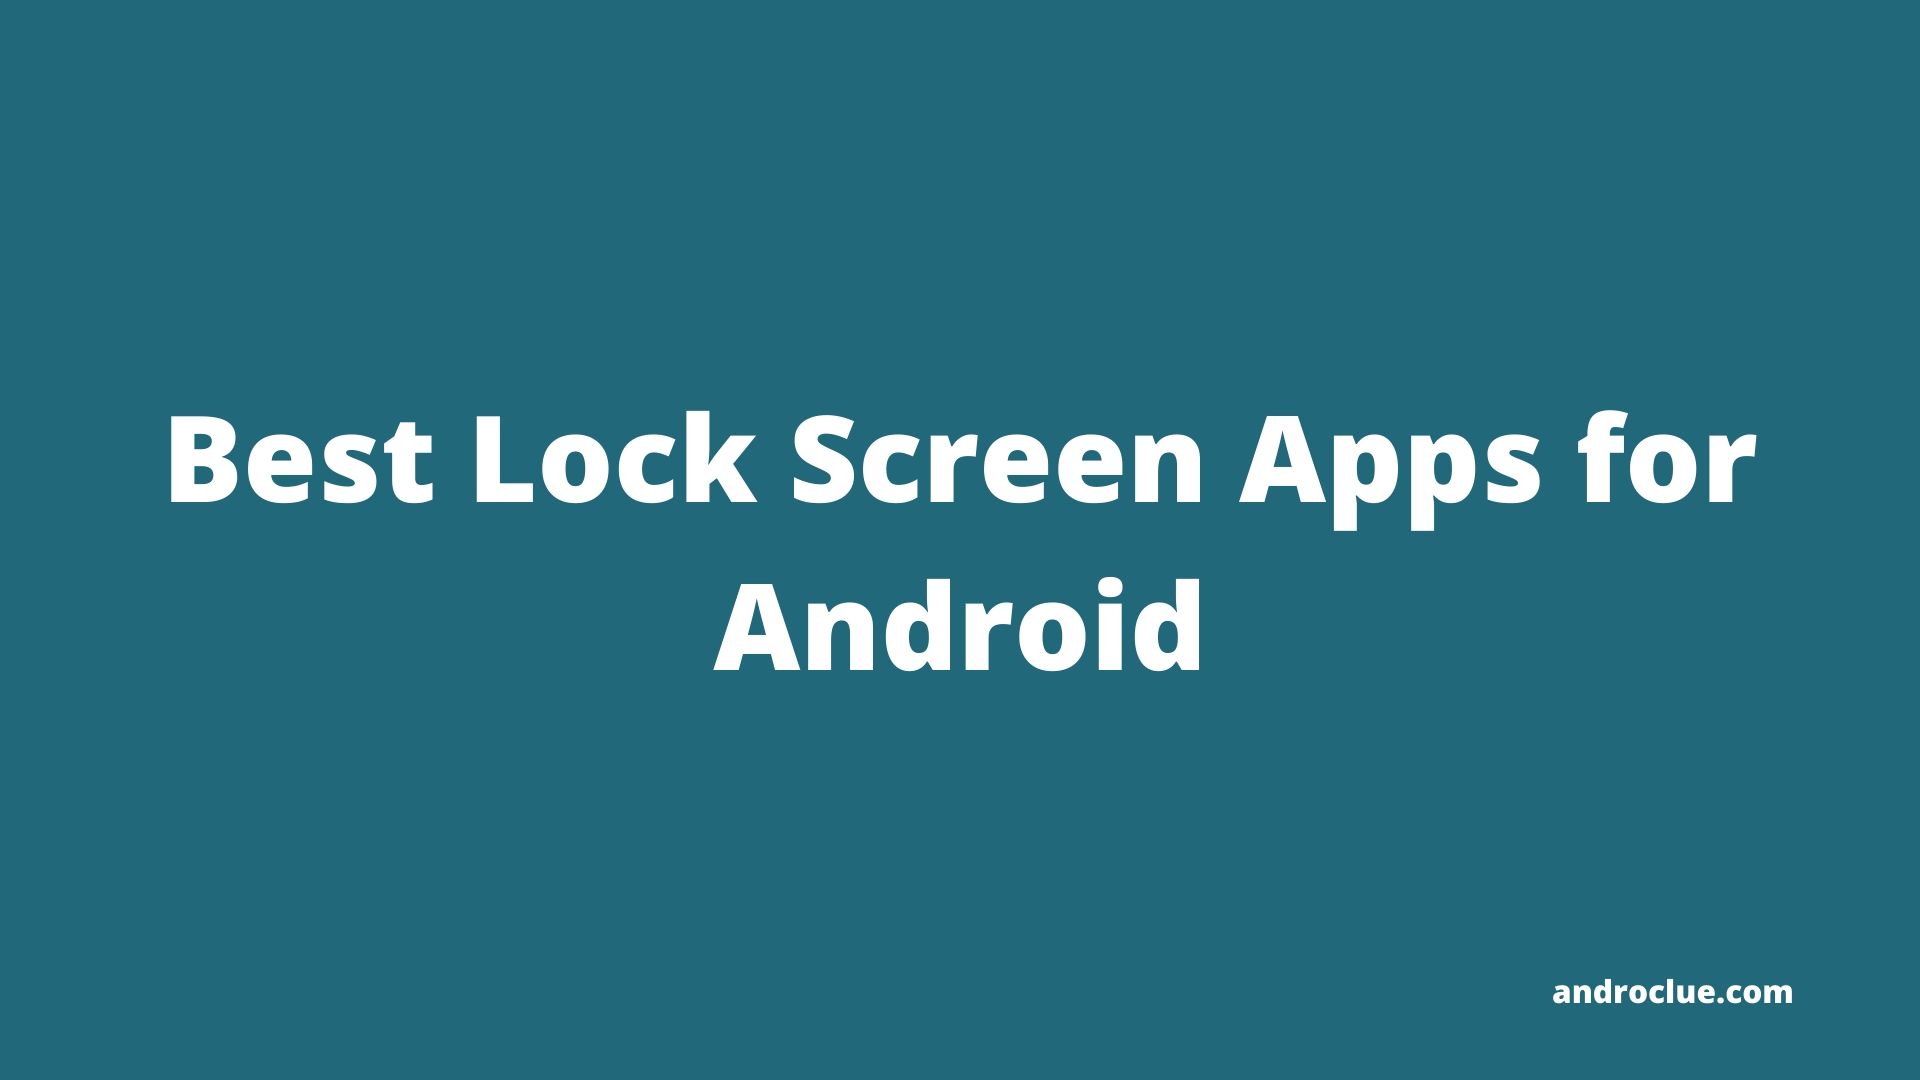 Top 7 Best Lock Screen Apps for Android Devices to Use in 2020